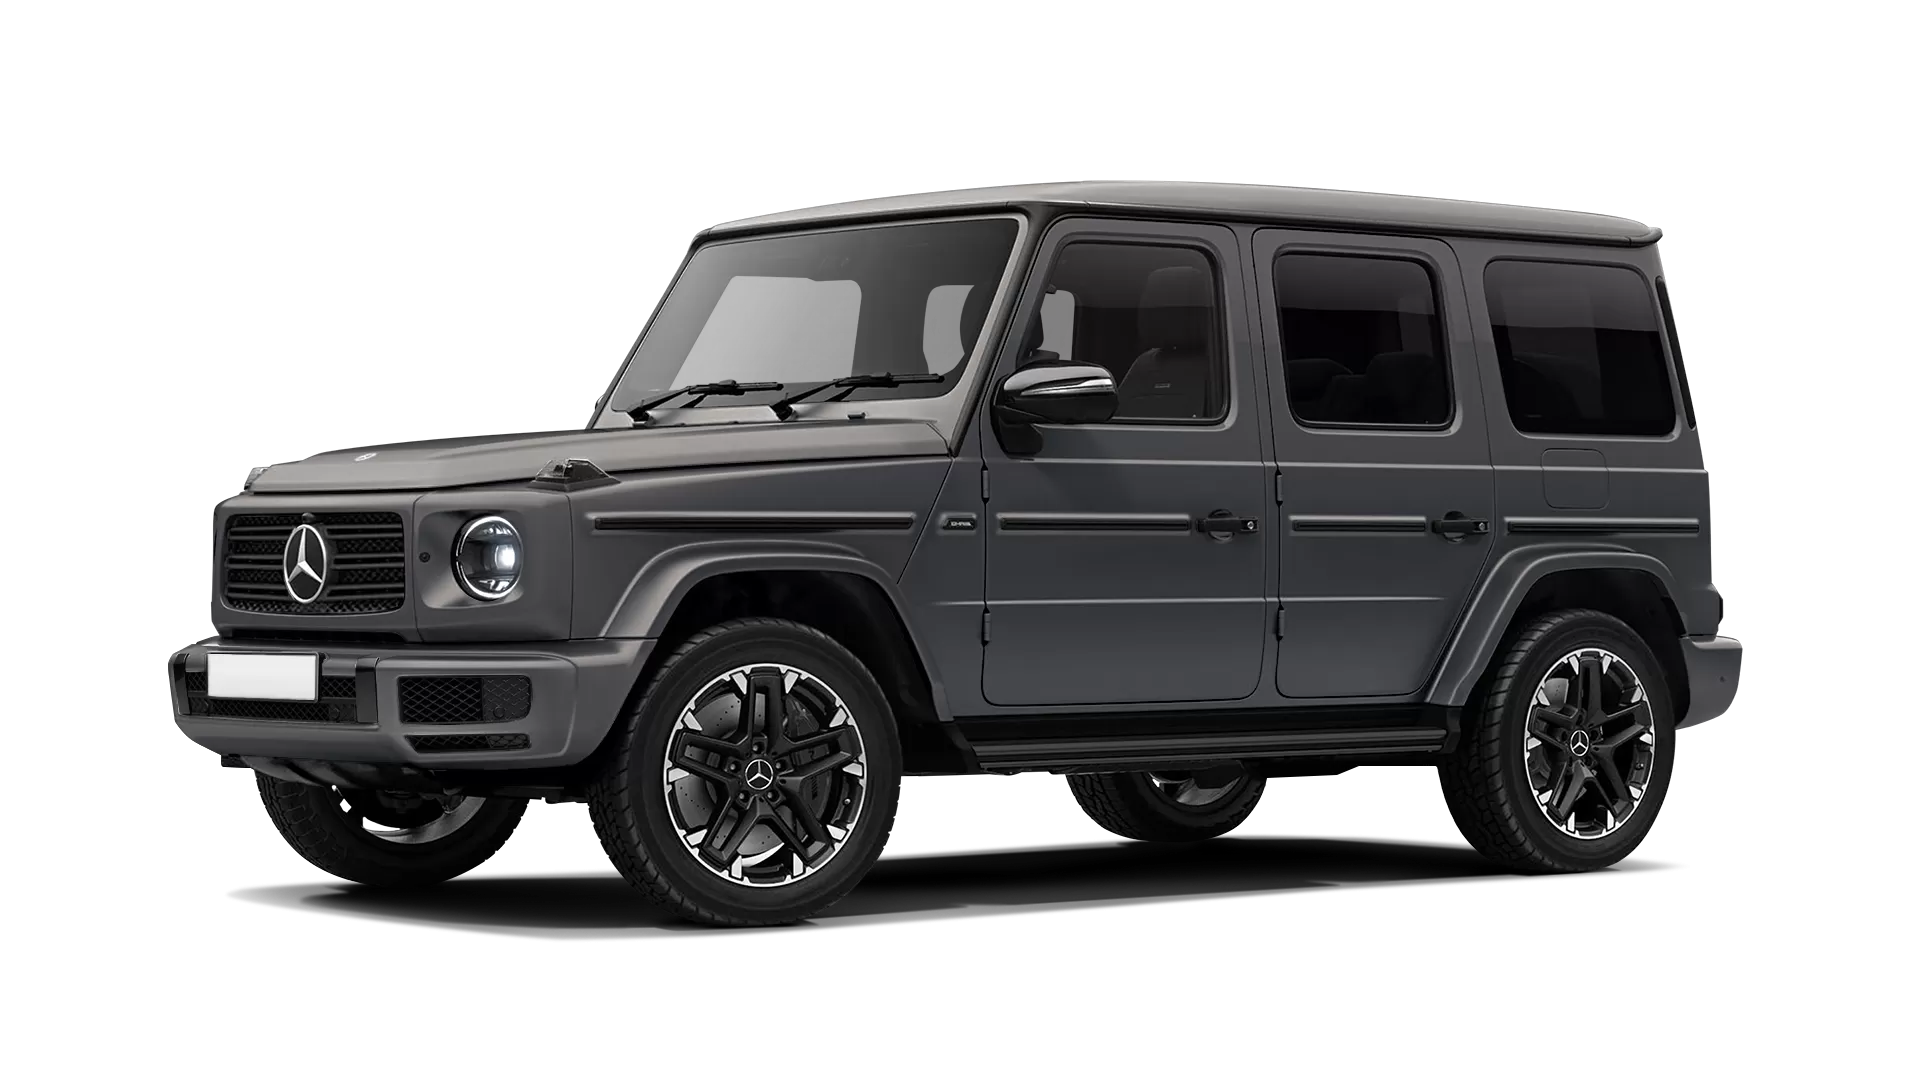 Mercedes G class W463 stock front view in Monza Grey Magno Latte color